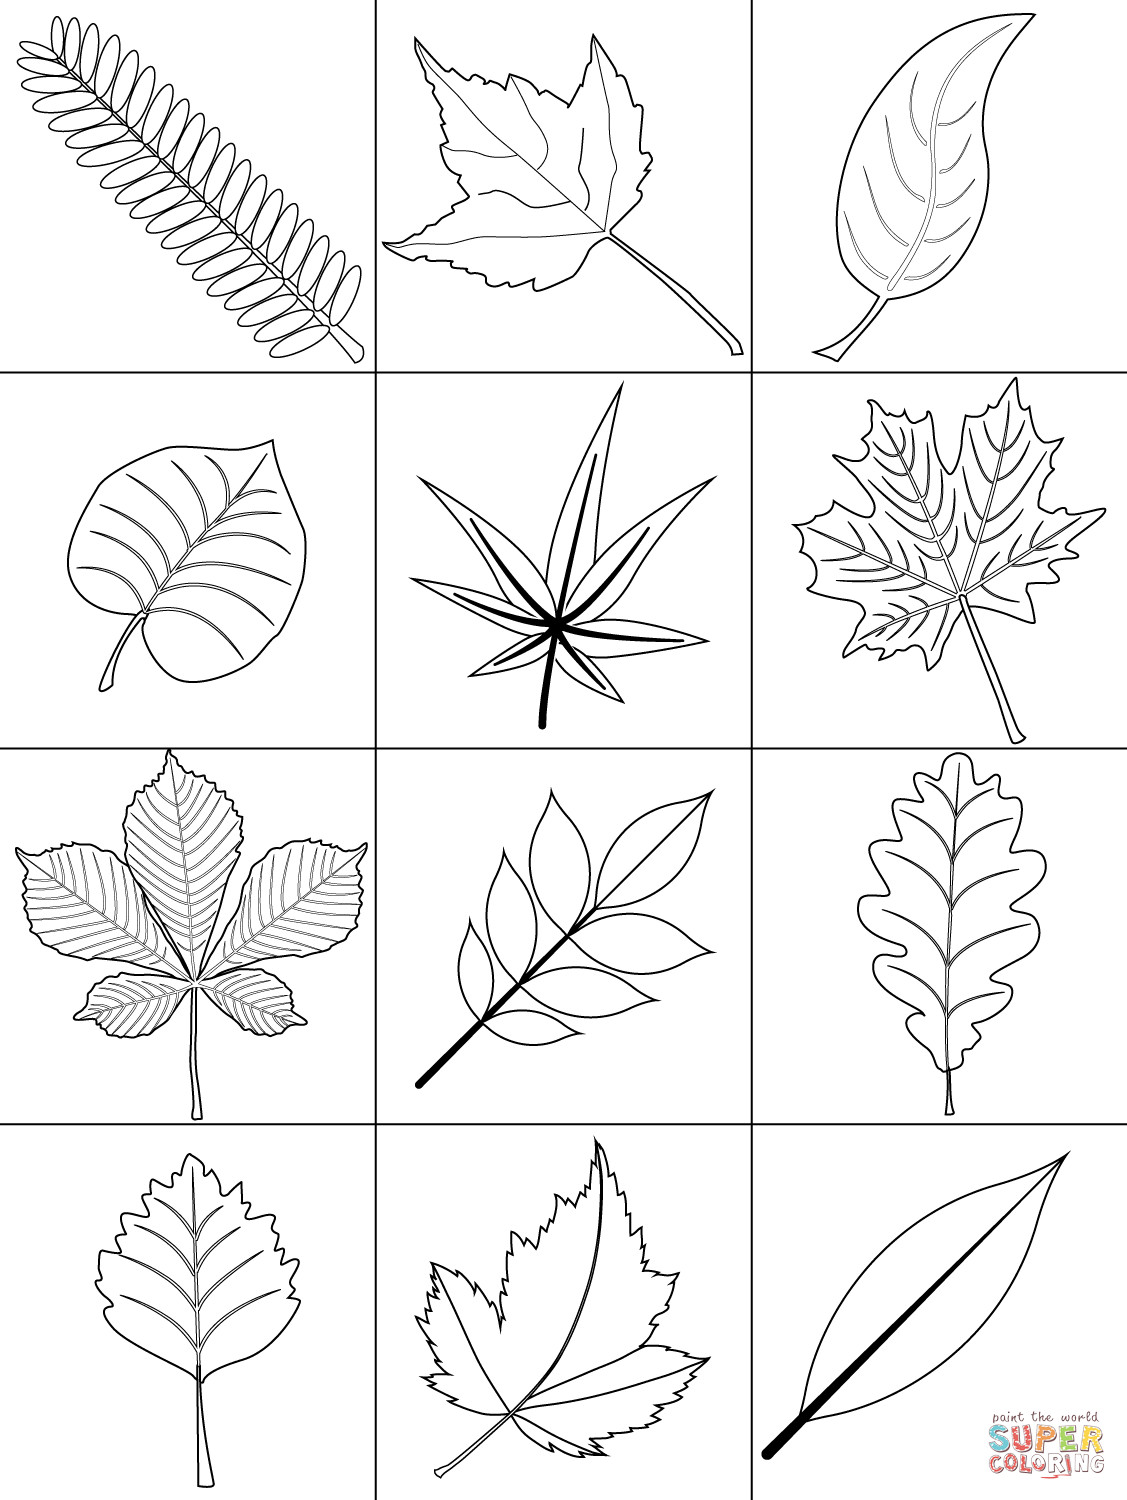 Printable Leaves Coloring Pages
 Autumn Leaves coloring page